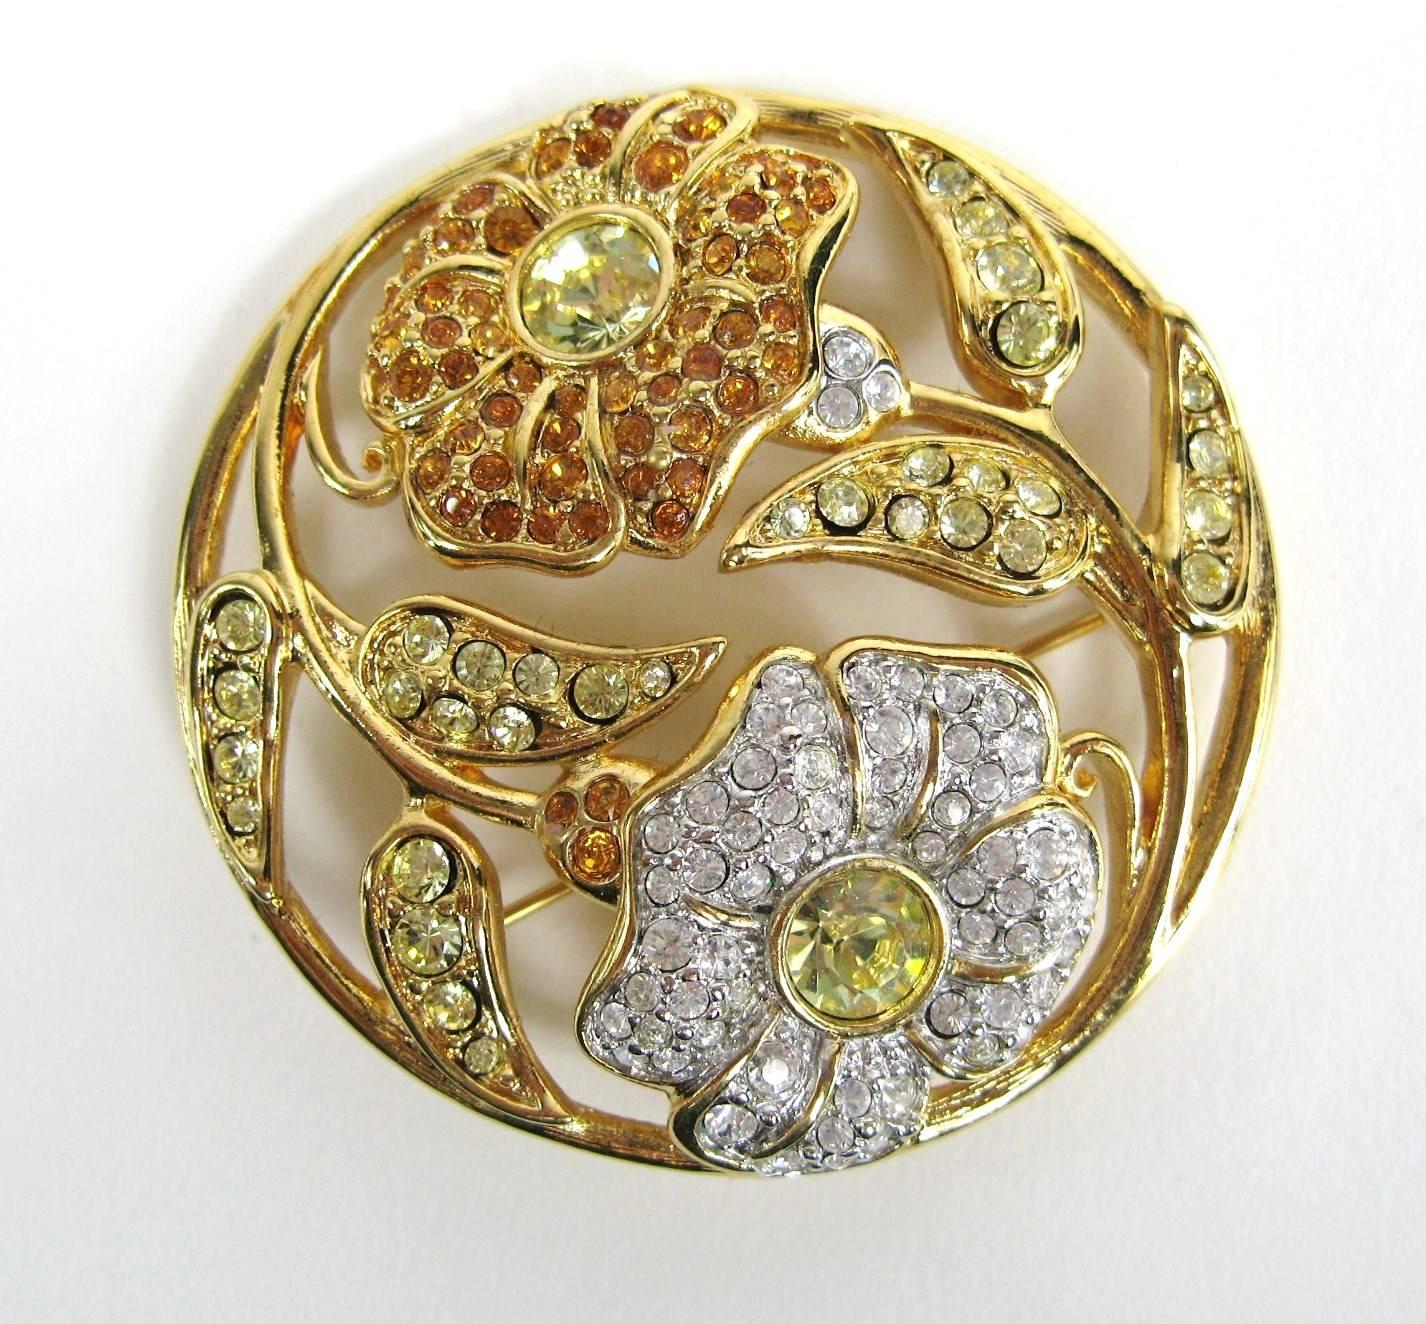 Stunning circle Swarovski Floral Brooch Amber and clear Crystal flowers. Measuring 1.90 in / 48.84 mm. This Comes in original Box. This is out of a massive collection of Hopi, Zuni, Navajo, Southwestern, sterling silver, costume jewelry and fine